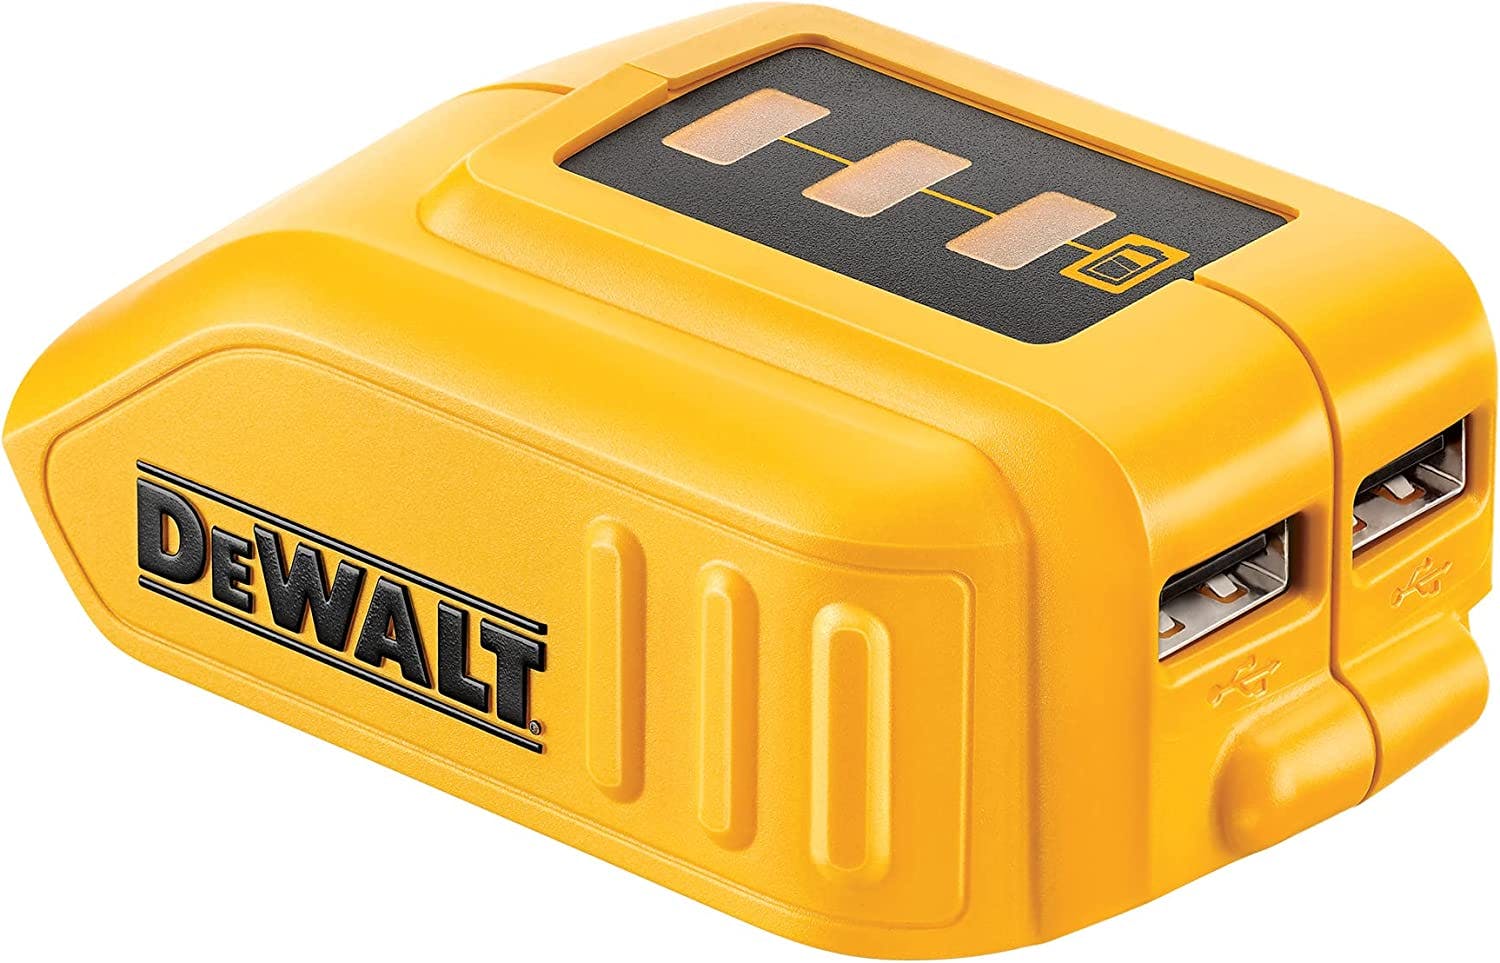 dewalt-USB-Charger Tool Only-Amazon